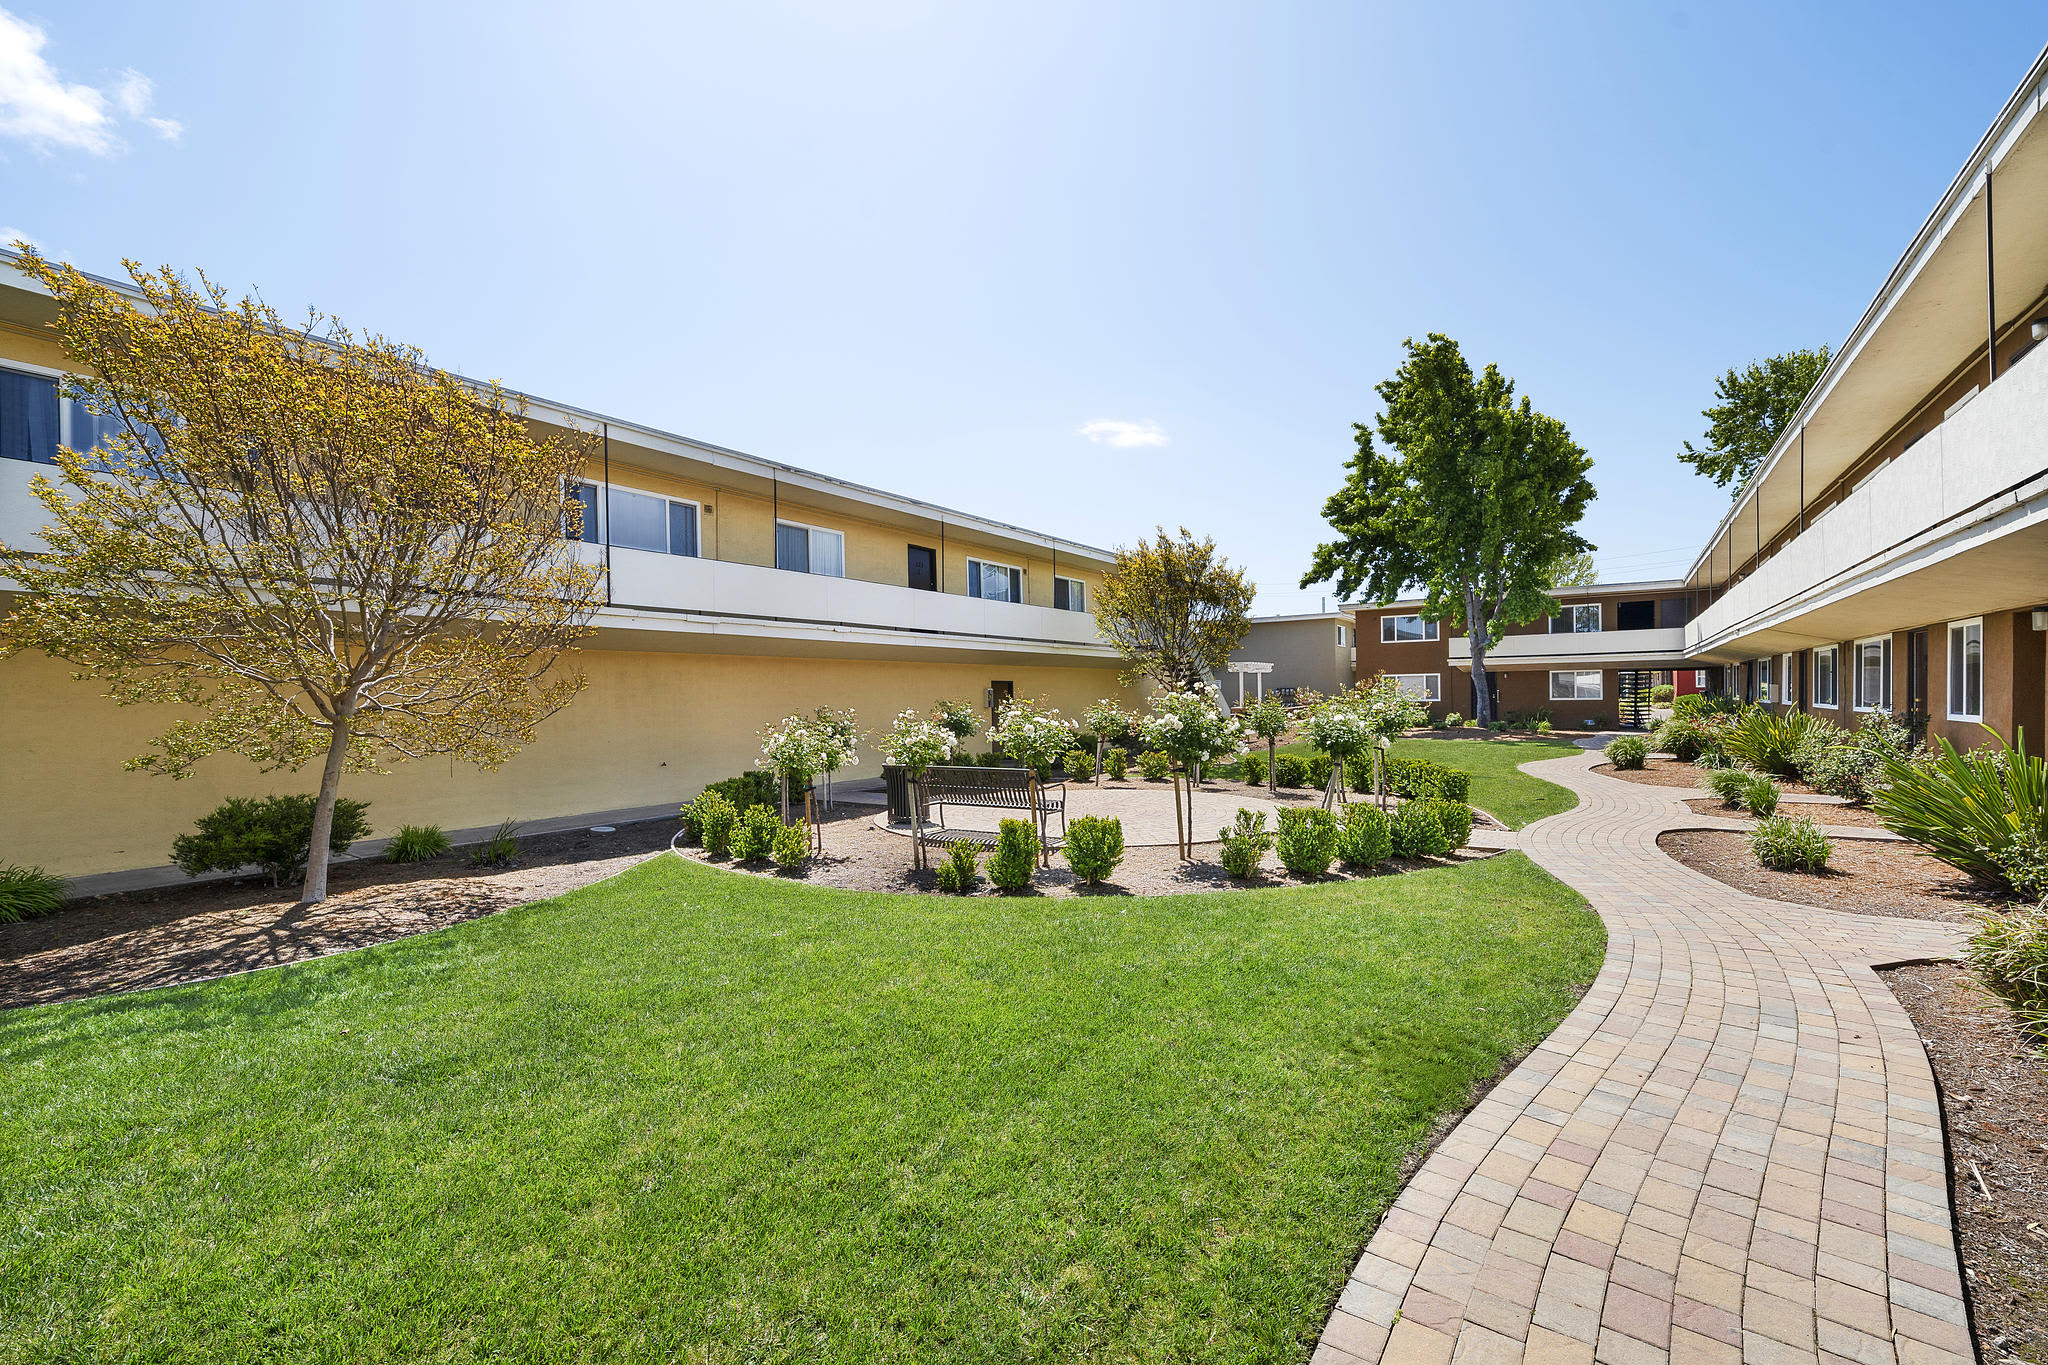 Well-manicured lawn and courtyard area at Garden Court Apartments in Alameda, California